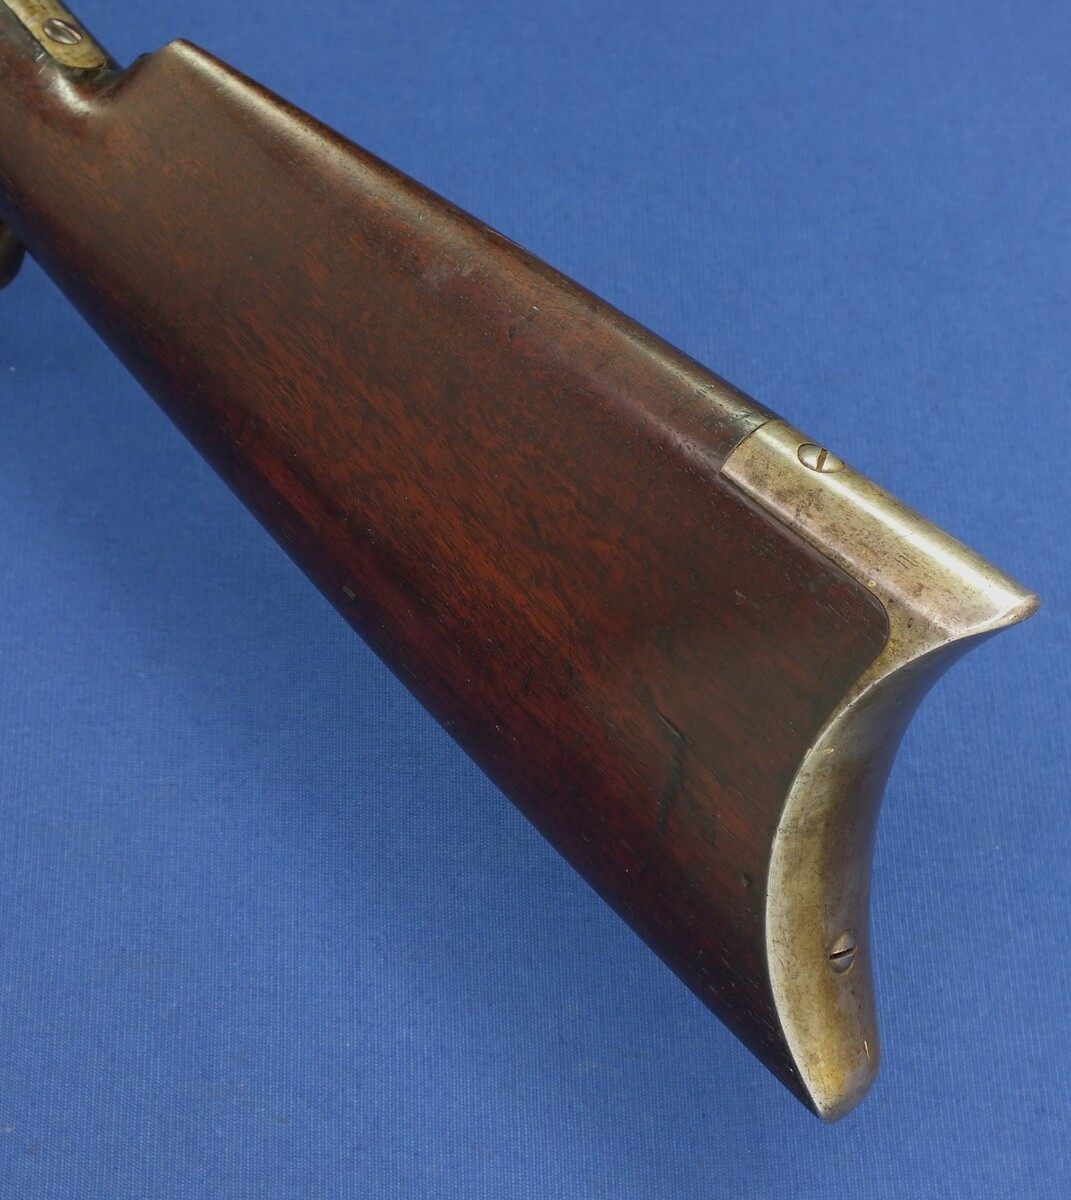 A fine antique American Winchester Model 1886 Sporting Rifle with 24 inch half round - half  octagonal Barrel. Caliber 40-82 W.C.F. Length 109cm. In very good condition. Price 5.200 euro